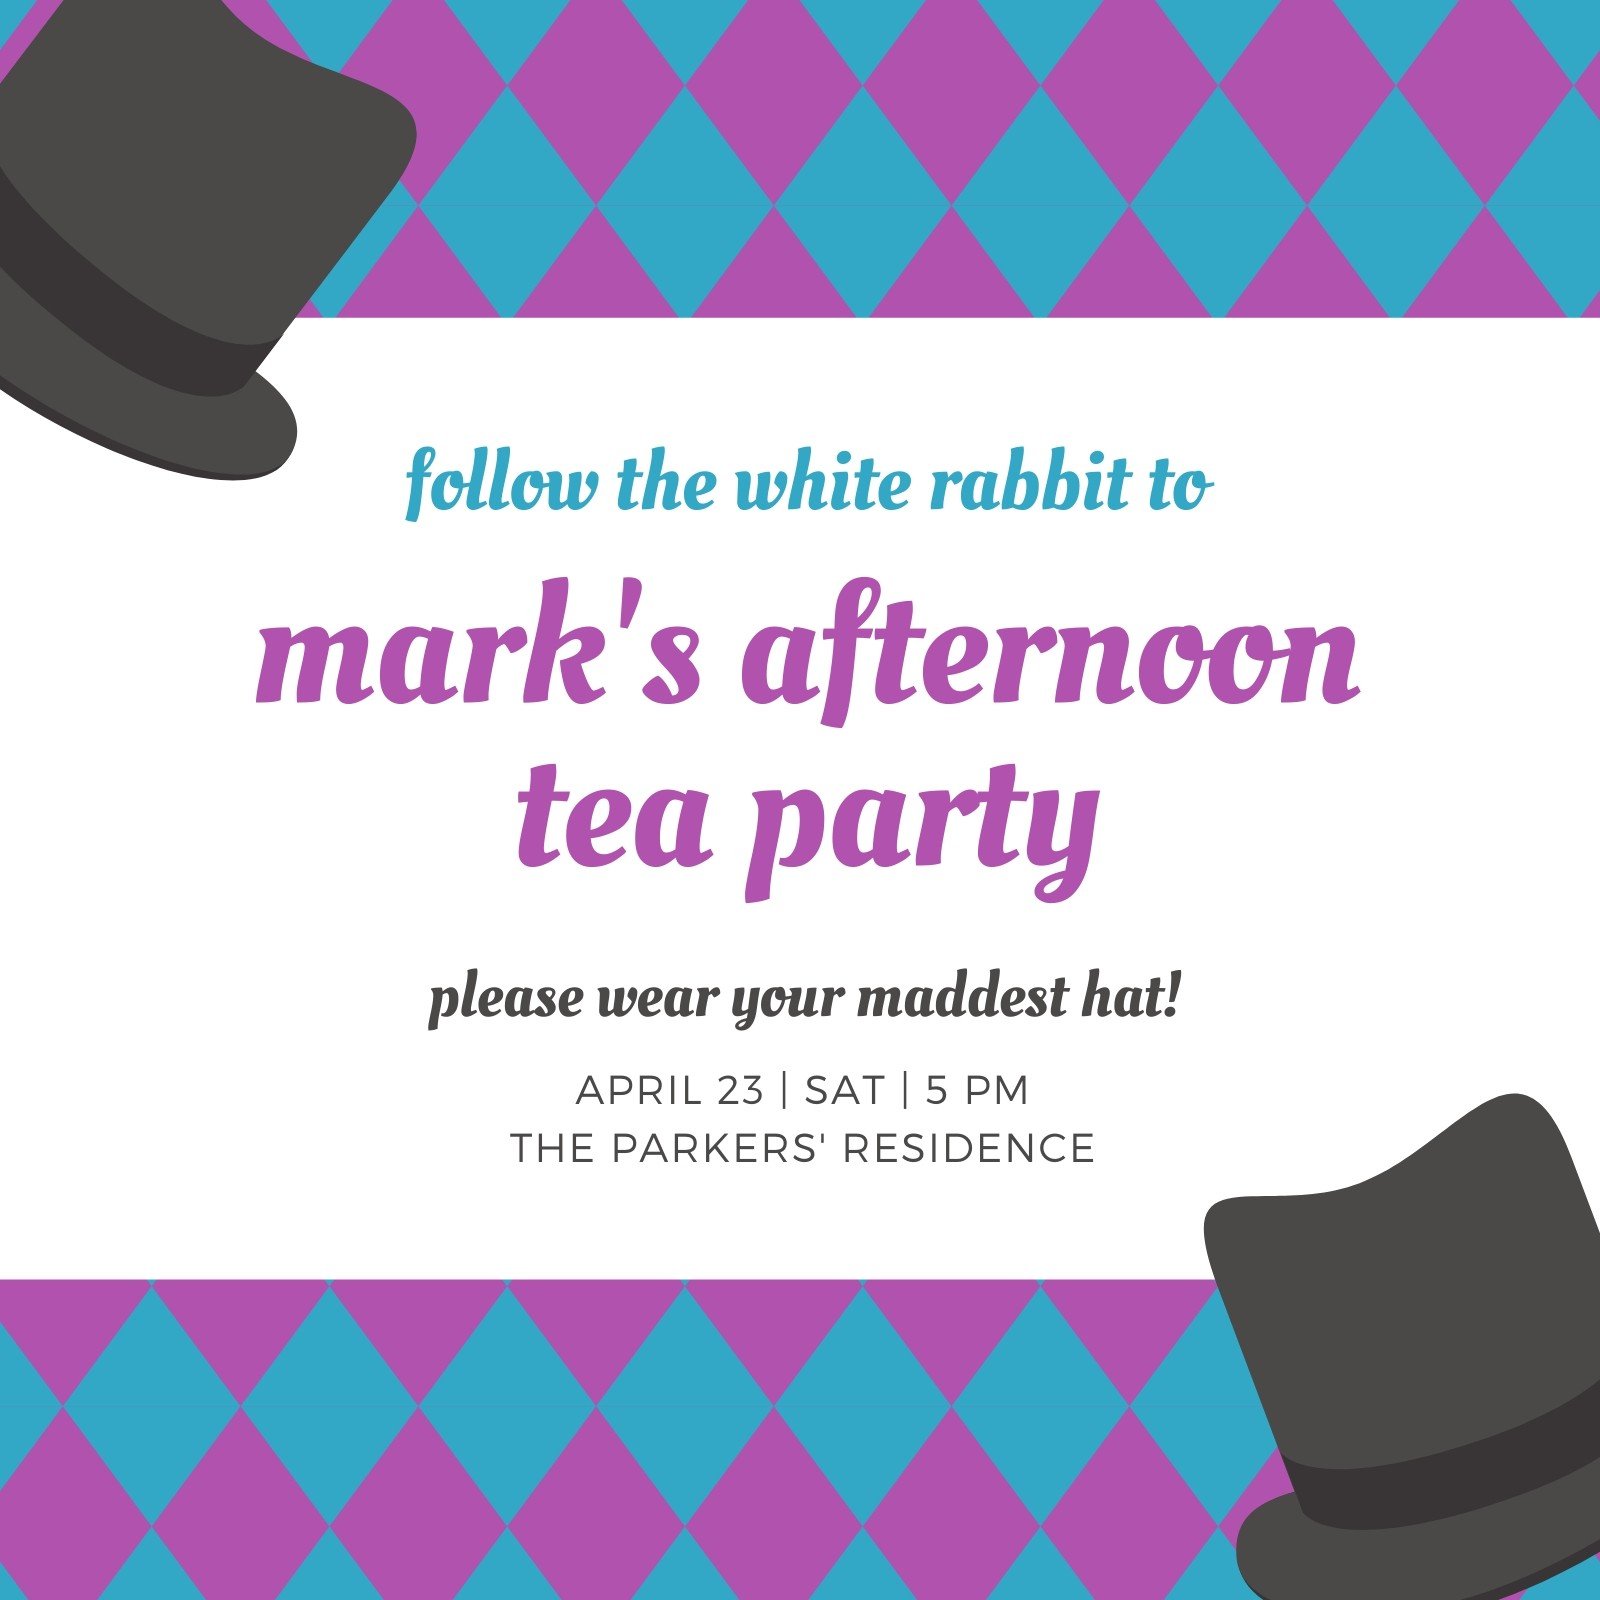 Mad Hatter Tea Party Poster / Pink / INSTANT DOWNLOAD / Alice in Wonderland  / Pastel / Birthday / Baby Shower / Printable Sign / Decoration 